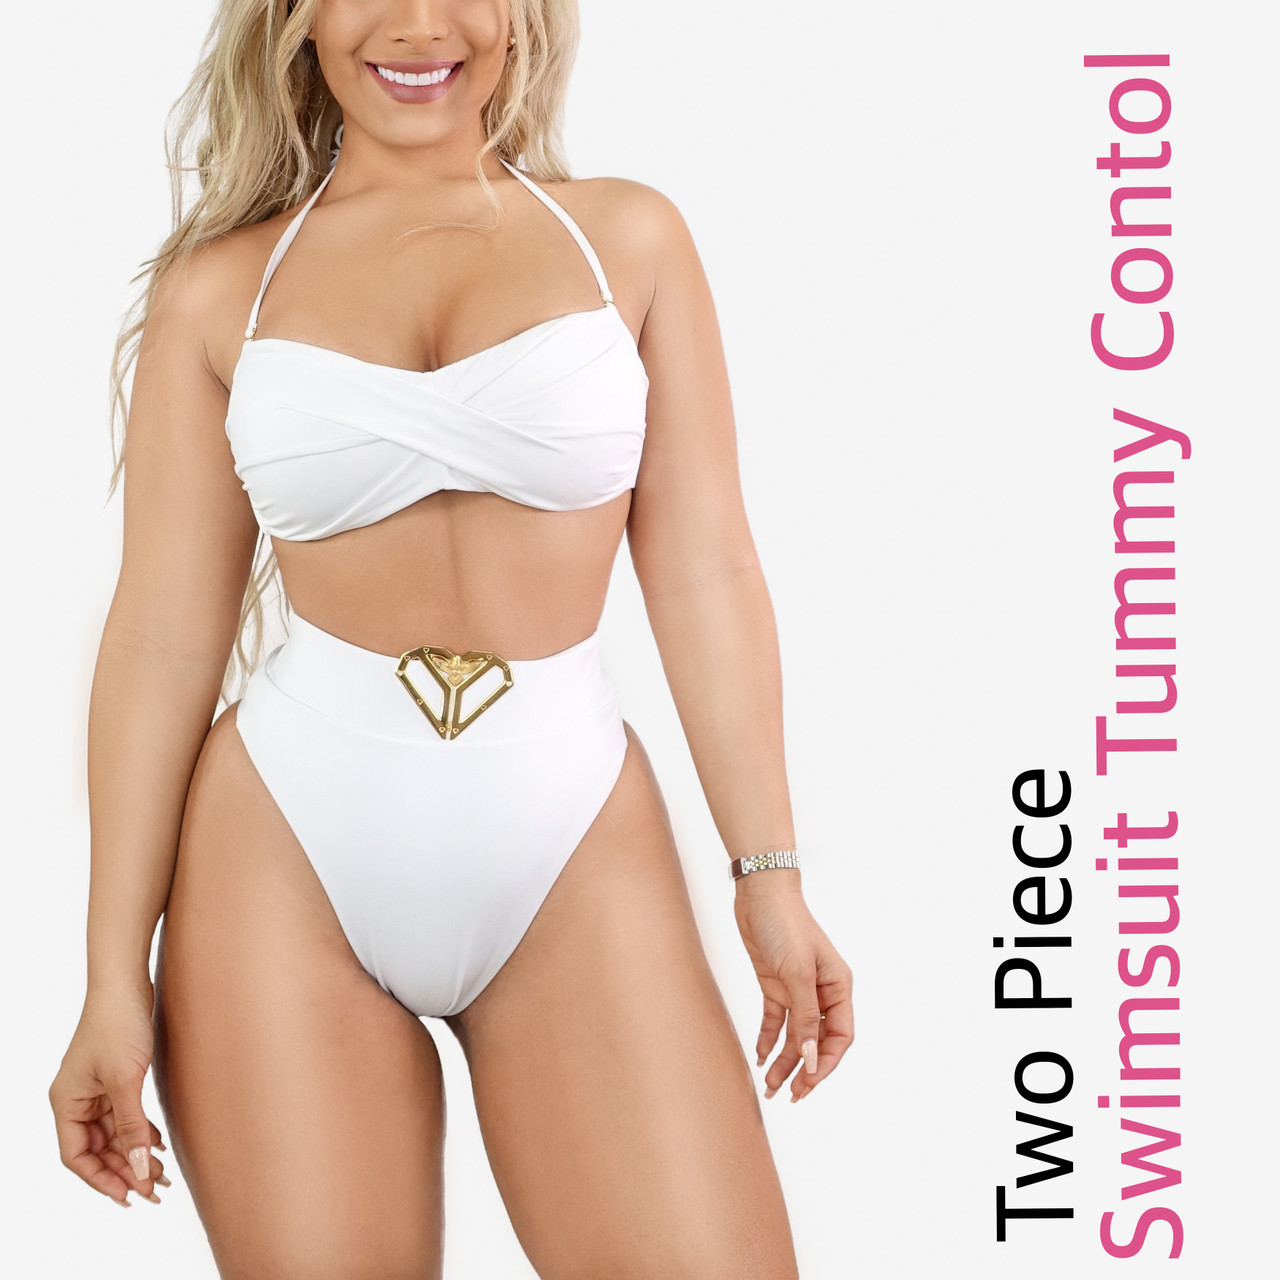 Cupshe Slimming Swimsuit Has Mesh in All the Right Places | Us Weekly